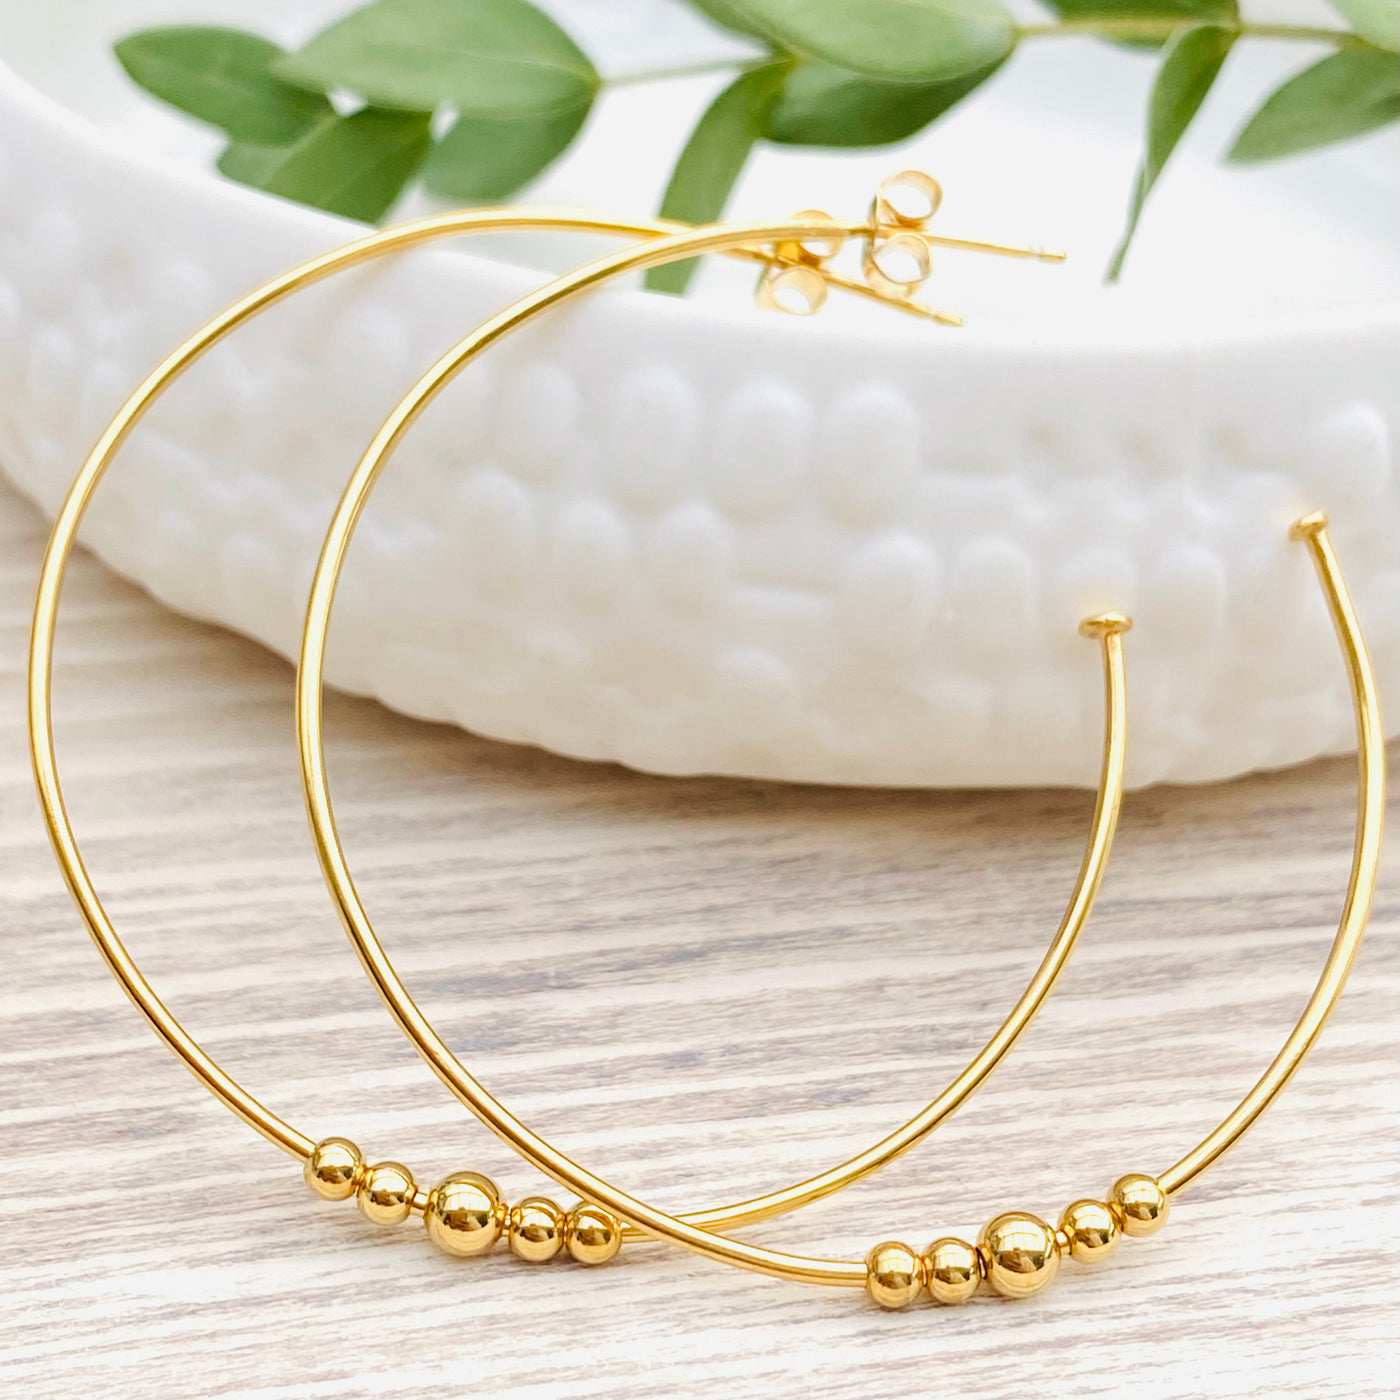 MayaH Jewellery Large Gold Vermeil Hoop Earrings with five 9ct Gold Beads